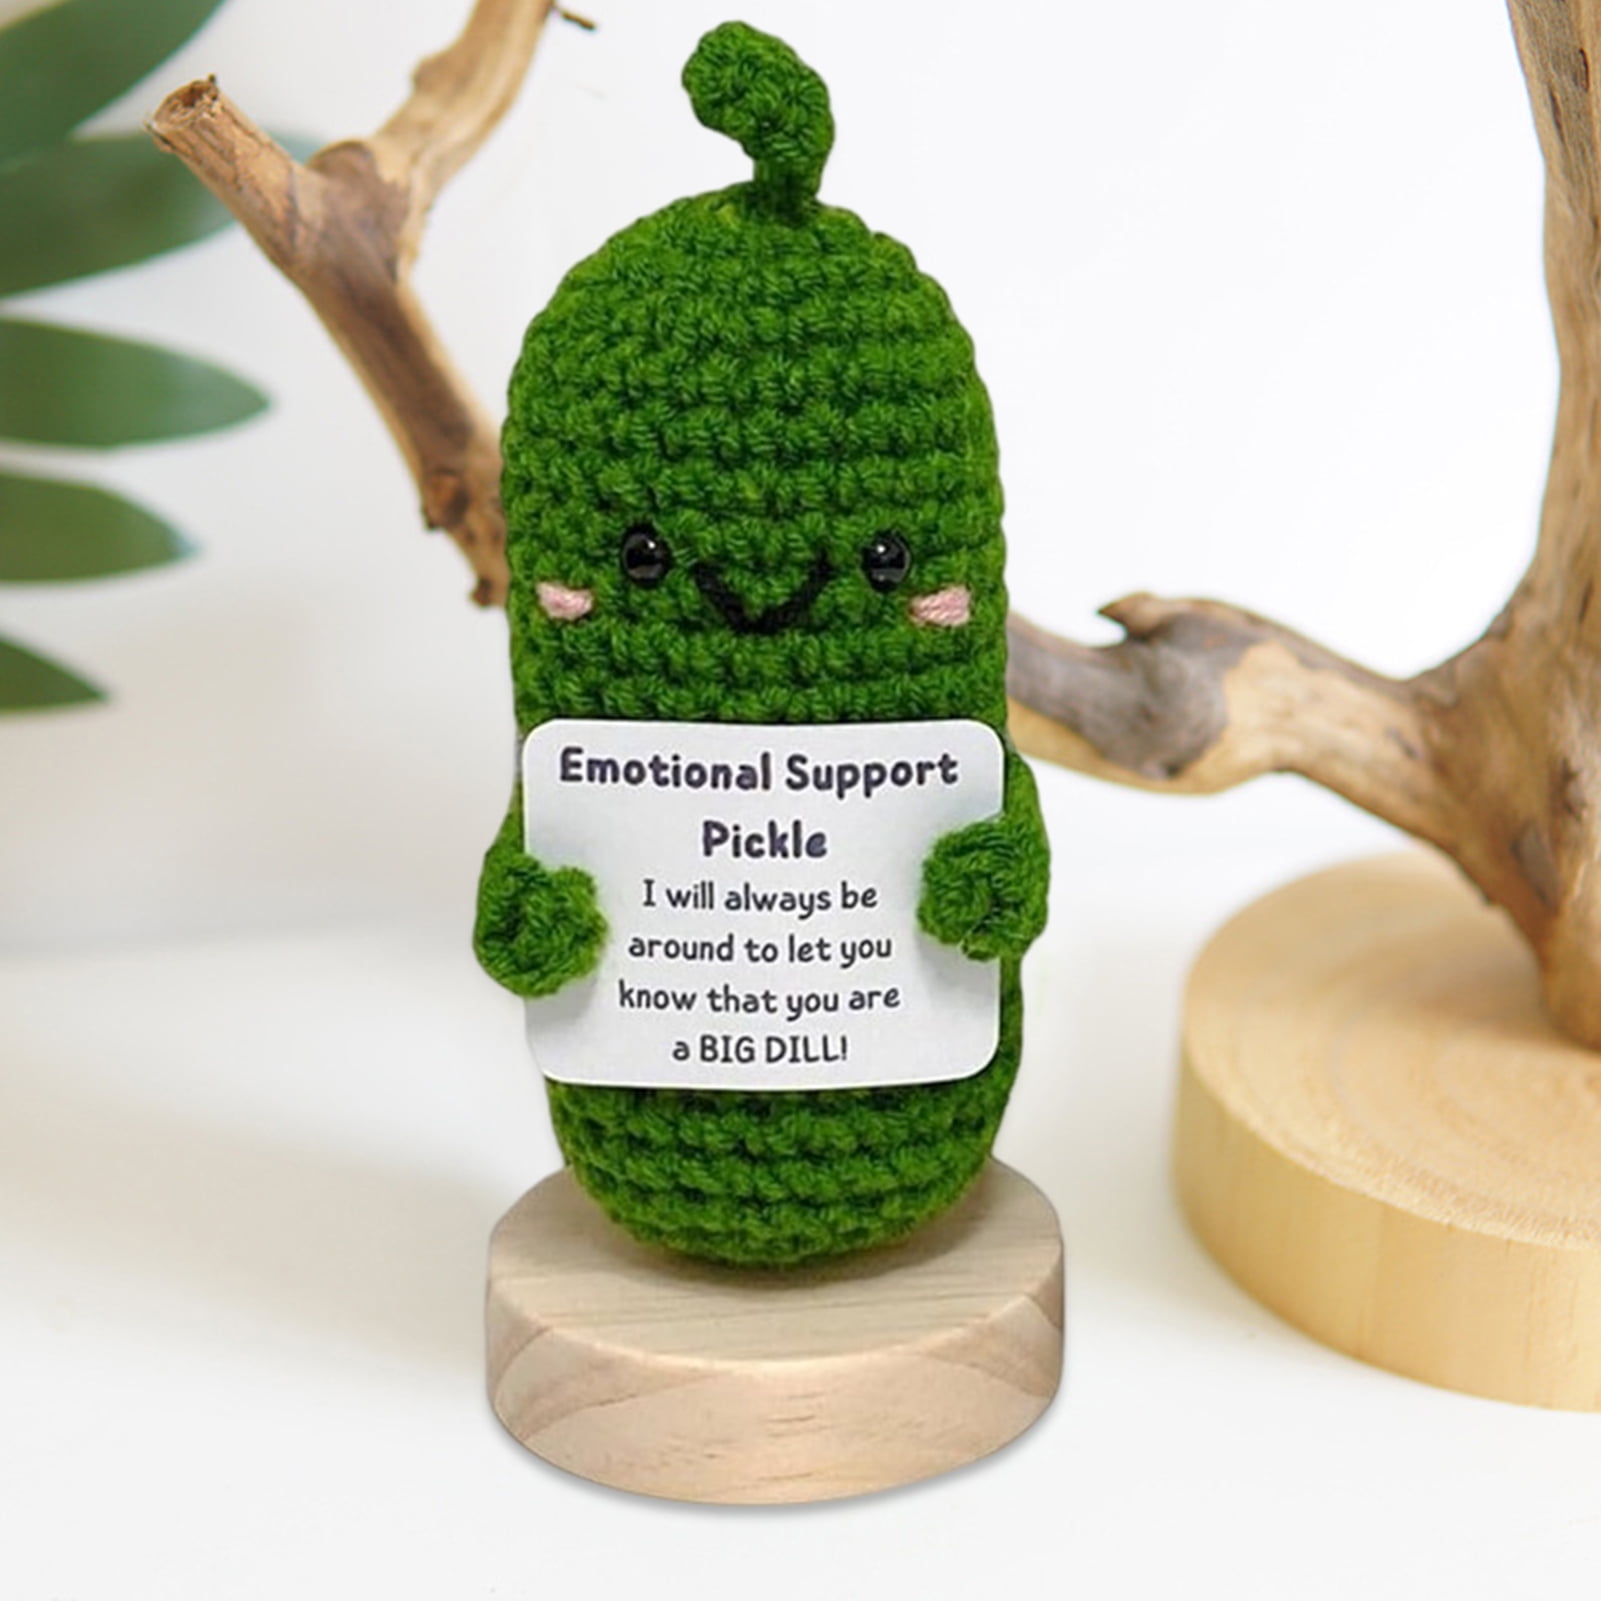 KCRPM Handmade Emotional Support Pickled Cucumber Gift, Handmade Crochet  Emotional Support Pickles with Wooden Base with Positive Affirmation Card